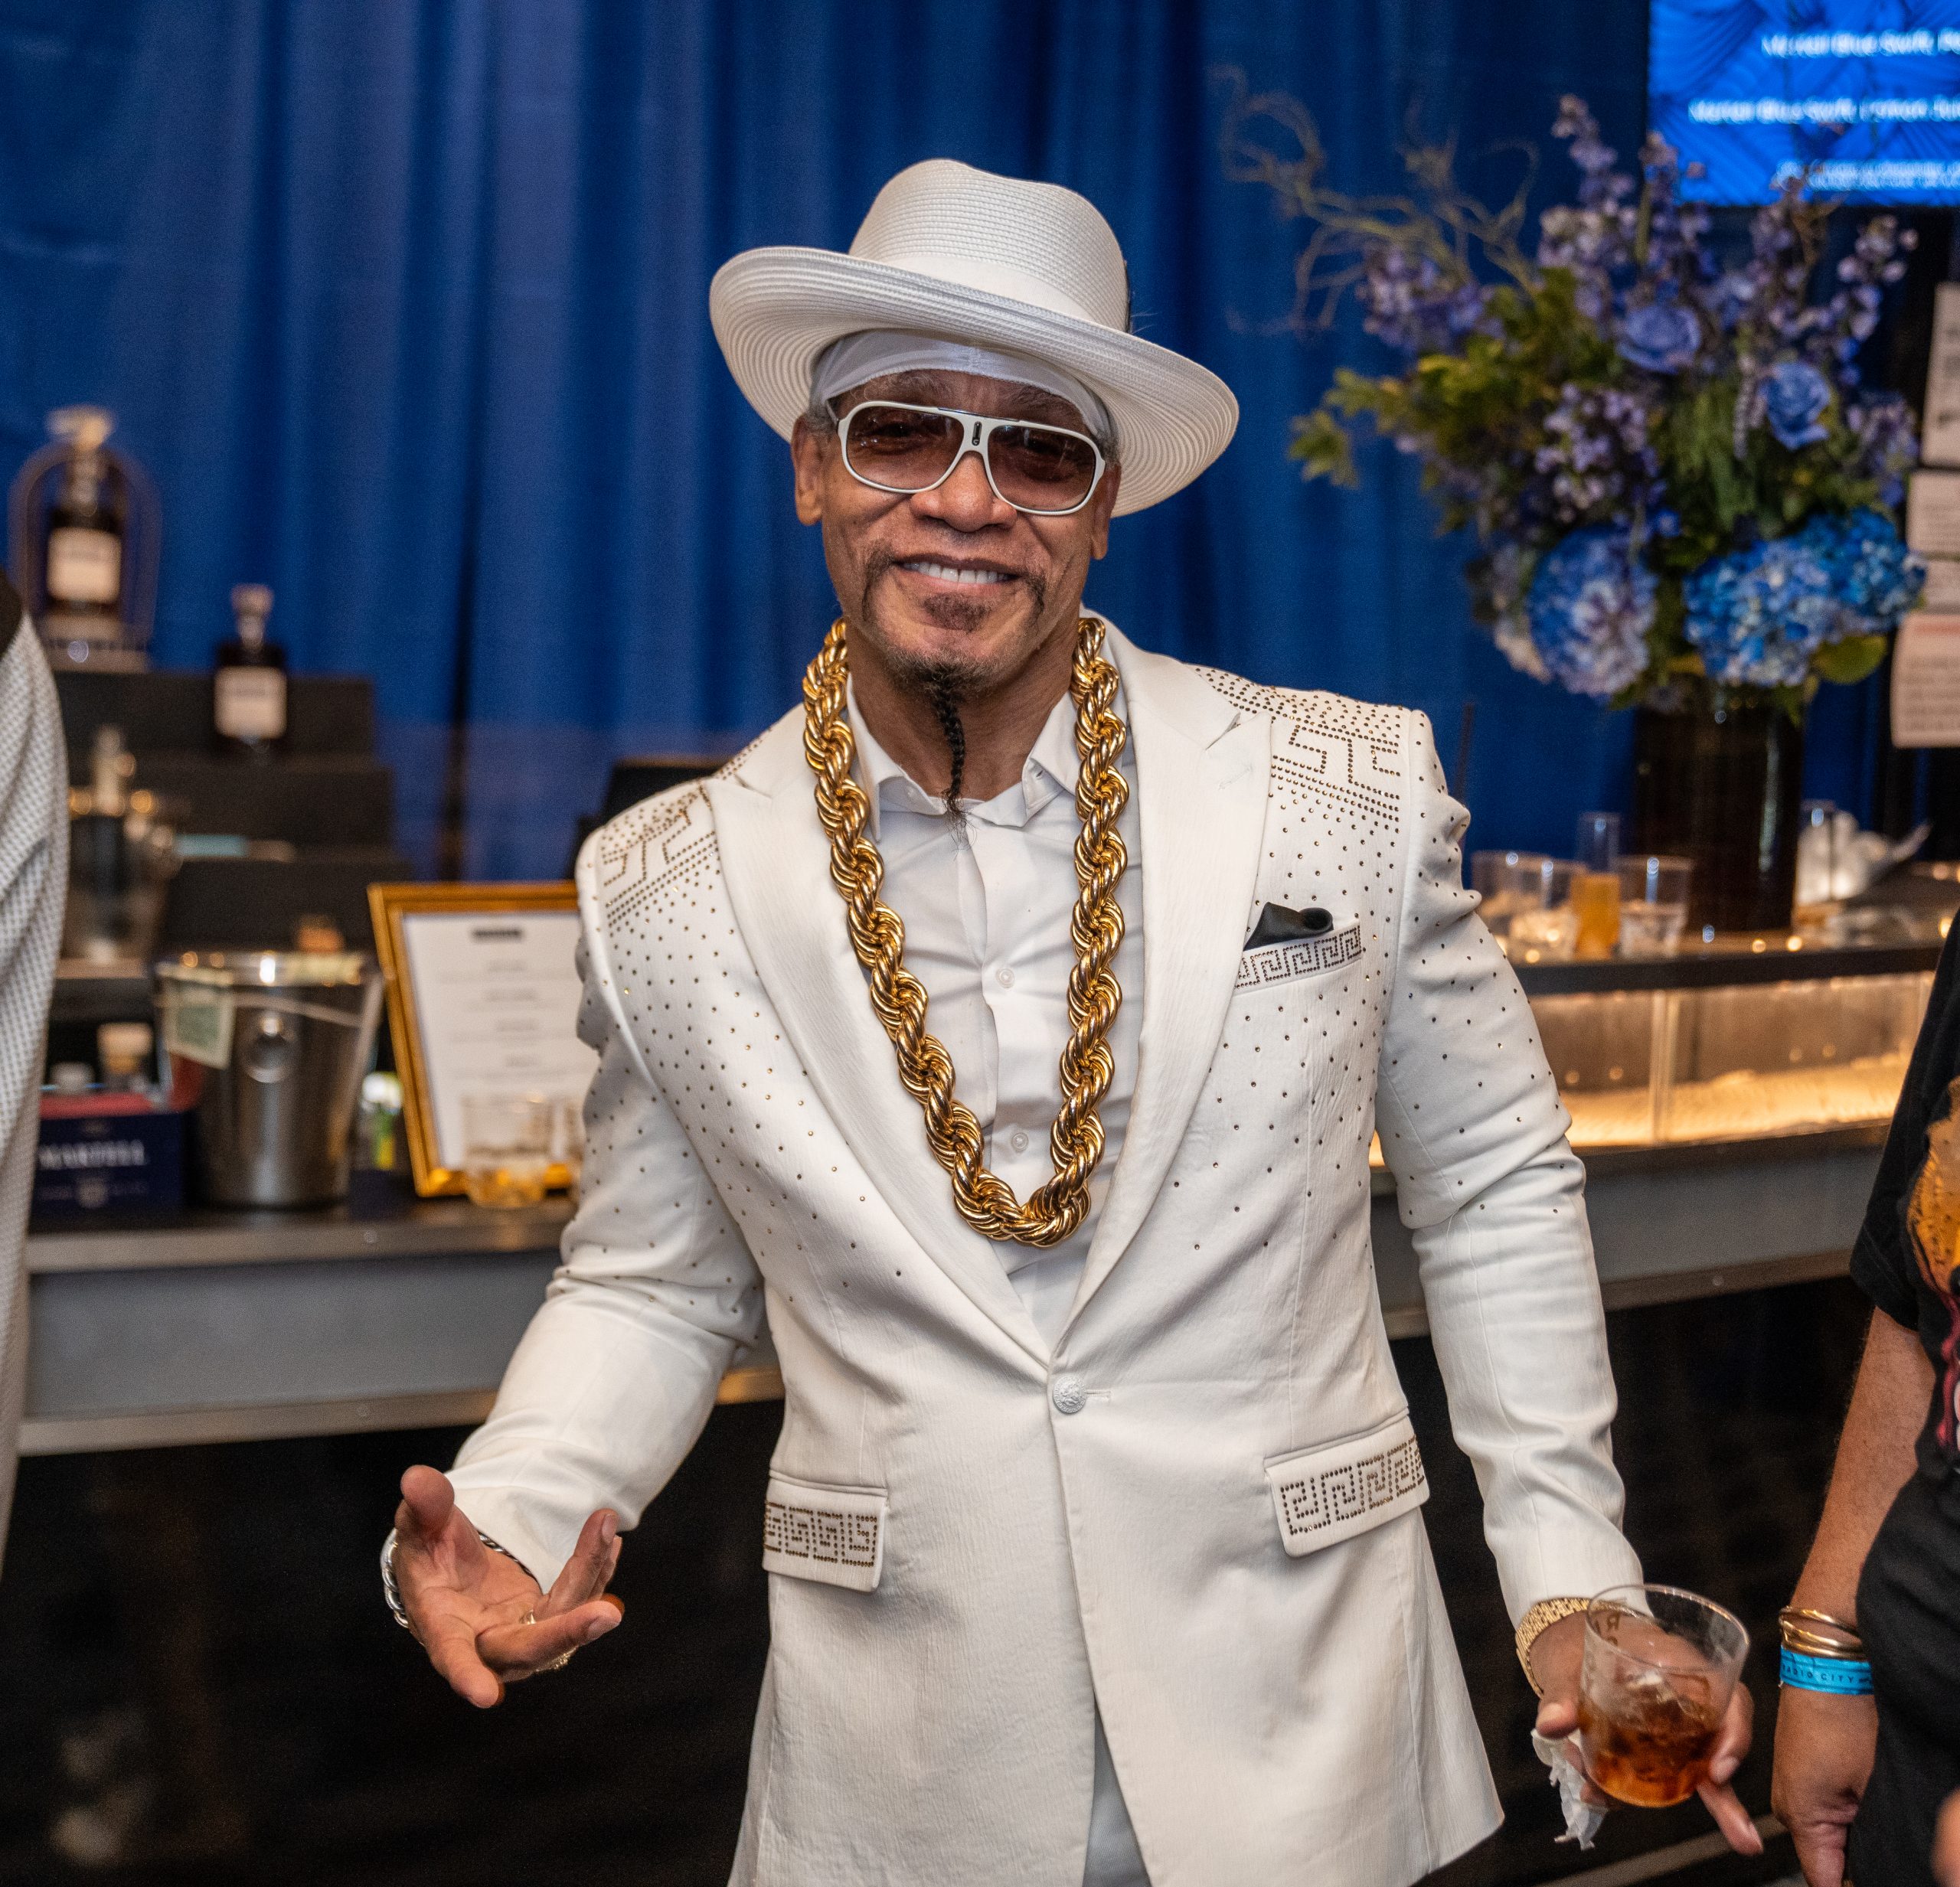 Grandmaster Melle Mel - Martell Cognac, The Black Promoters Collective, and Power 105.1 present DJ Cassidy's Pass The Mic LIVE at Radio City Music Hall in NYC